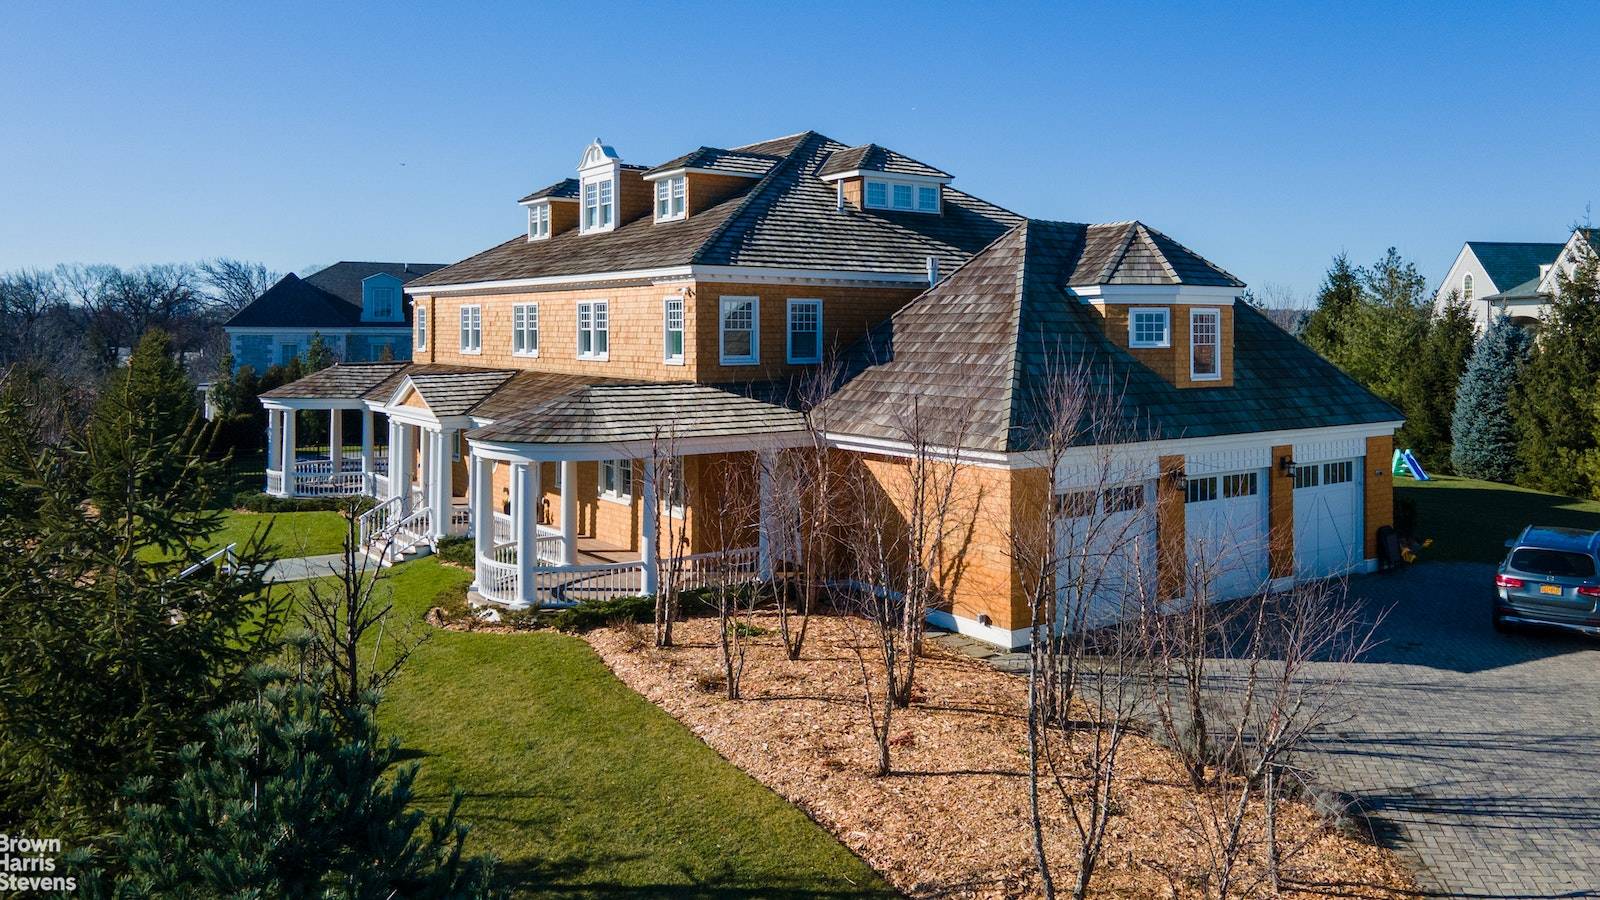 A Hamptons Lifestyle 22 minutes from Midtown !